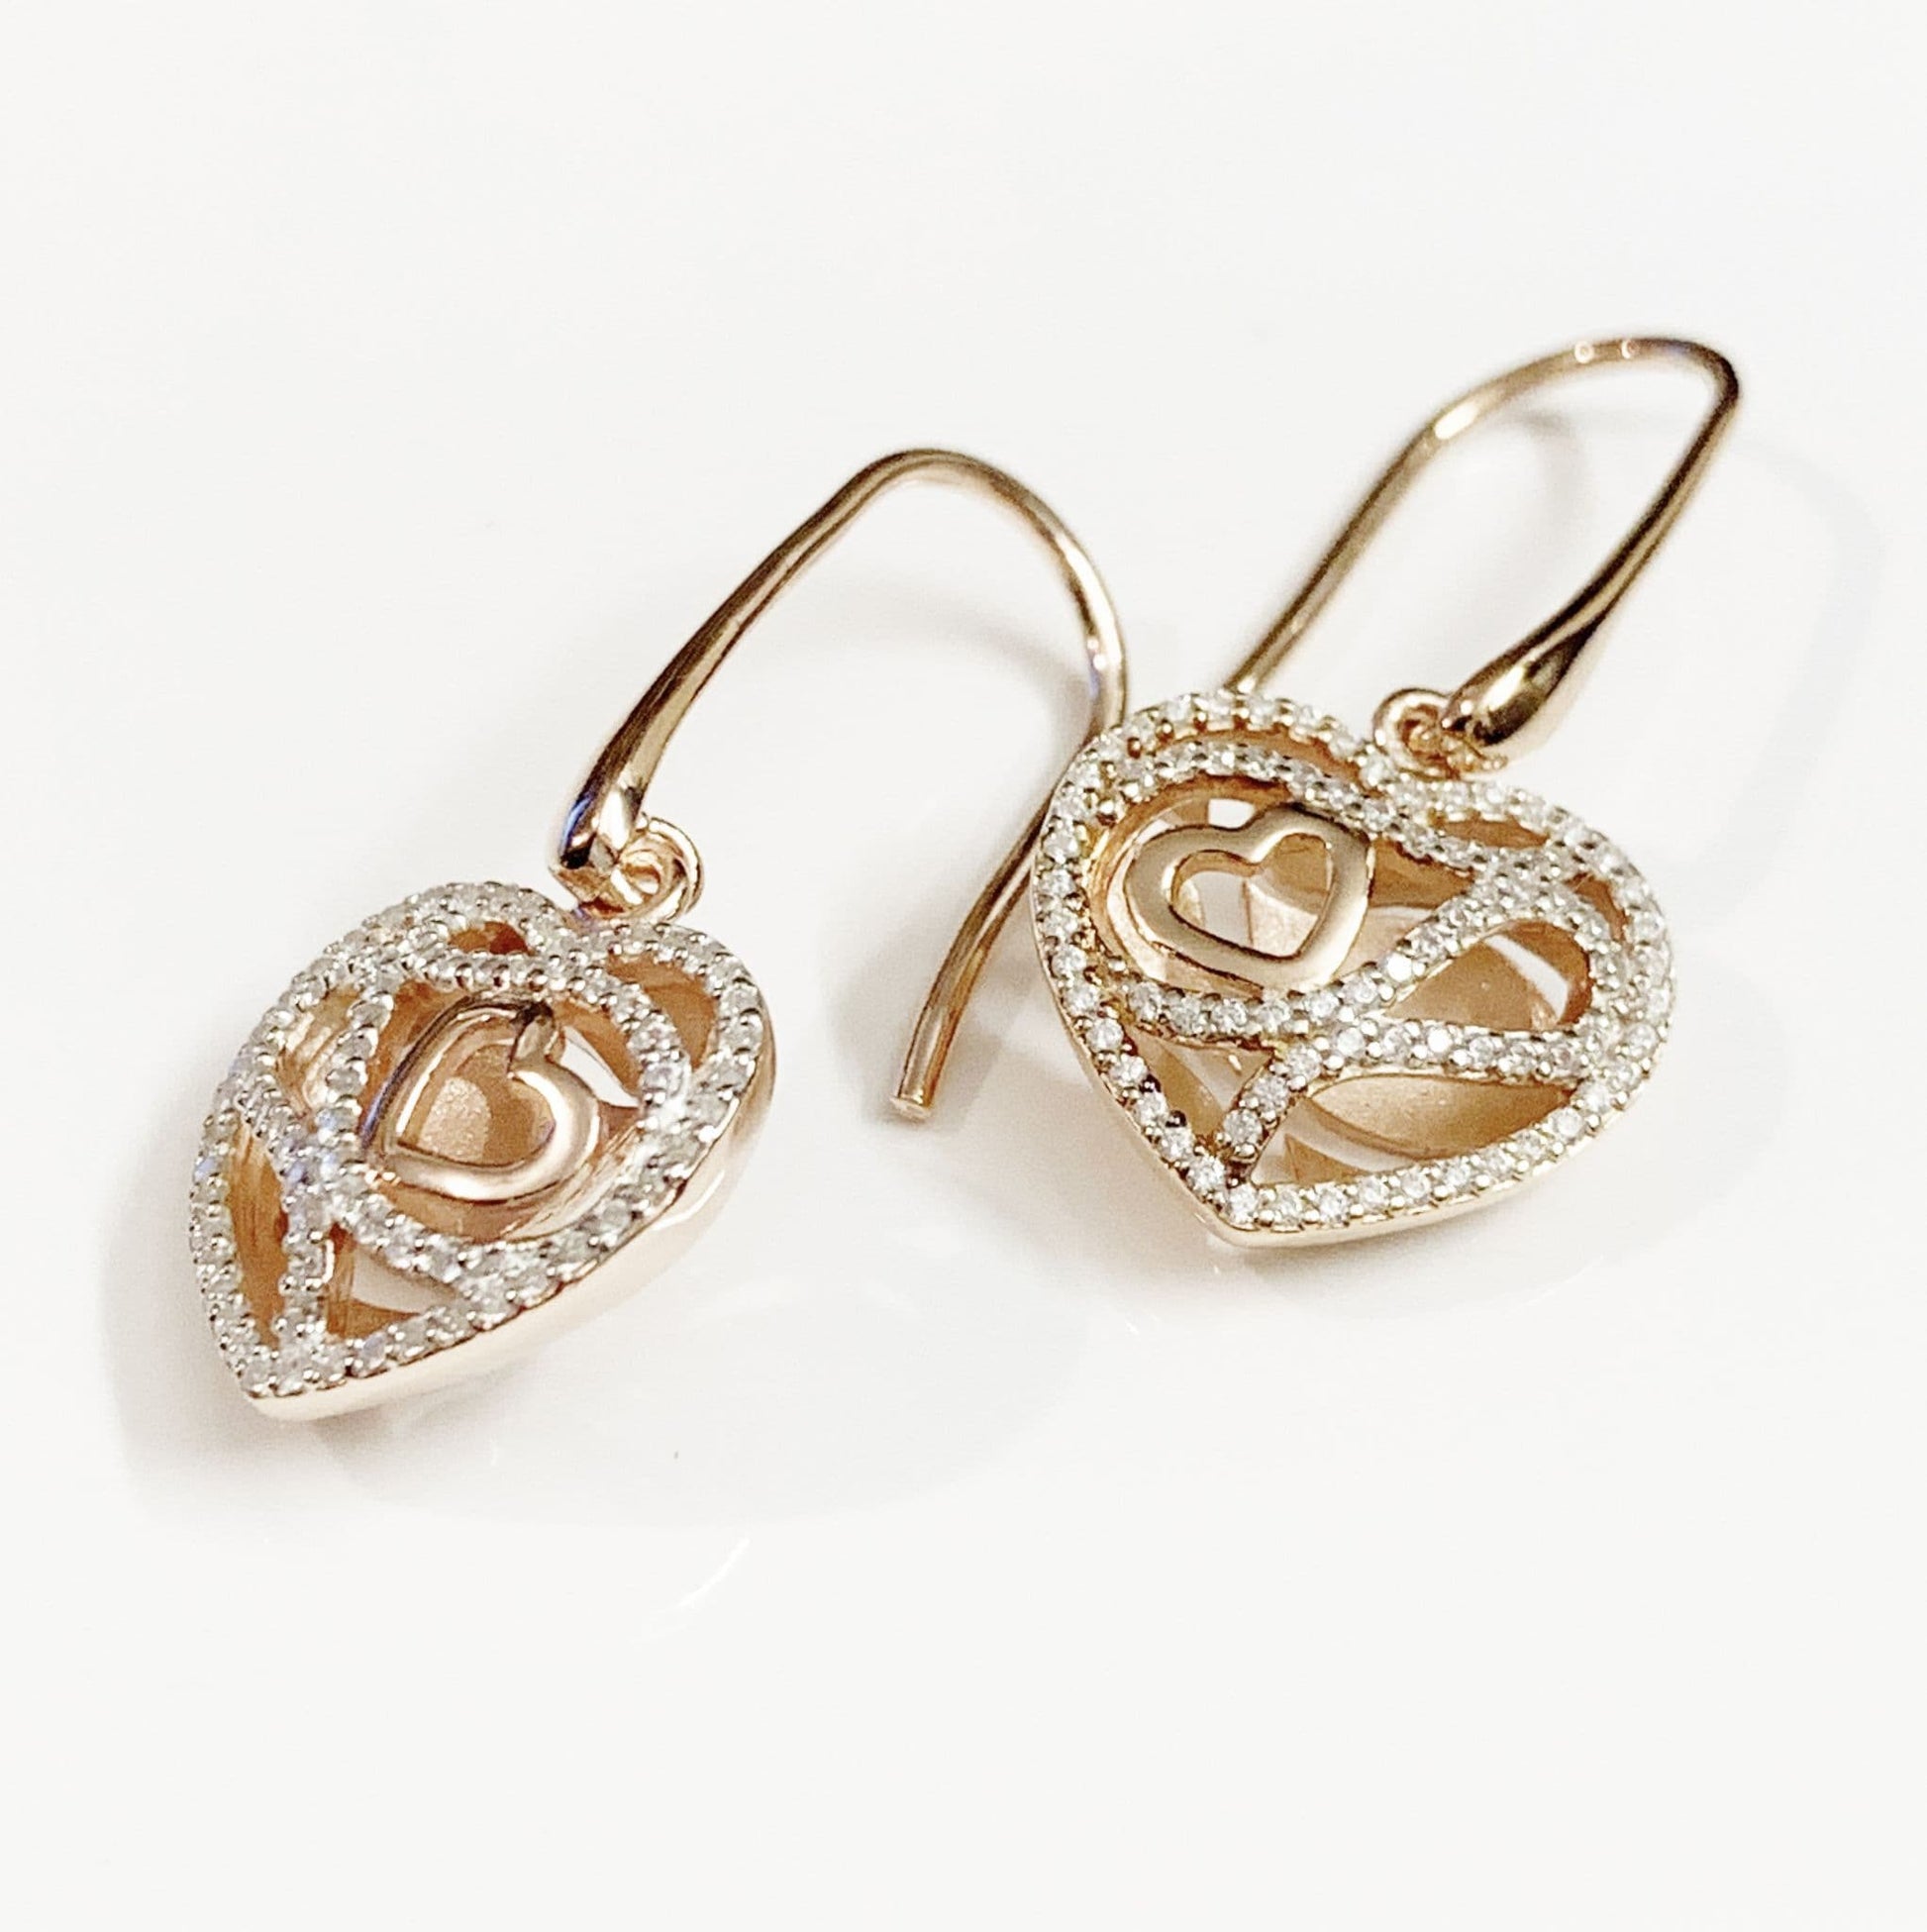 Sterling silver cubic zirconia heart drop earrings with rose gold gilt